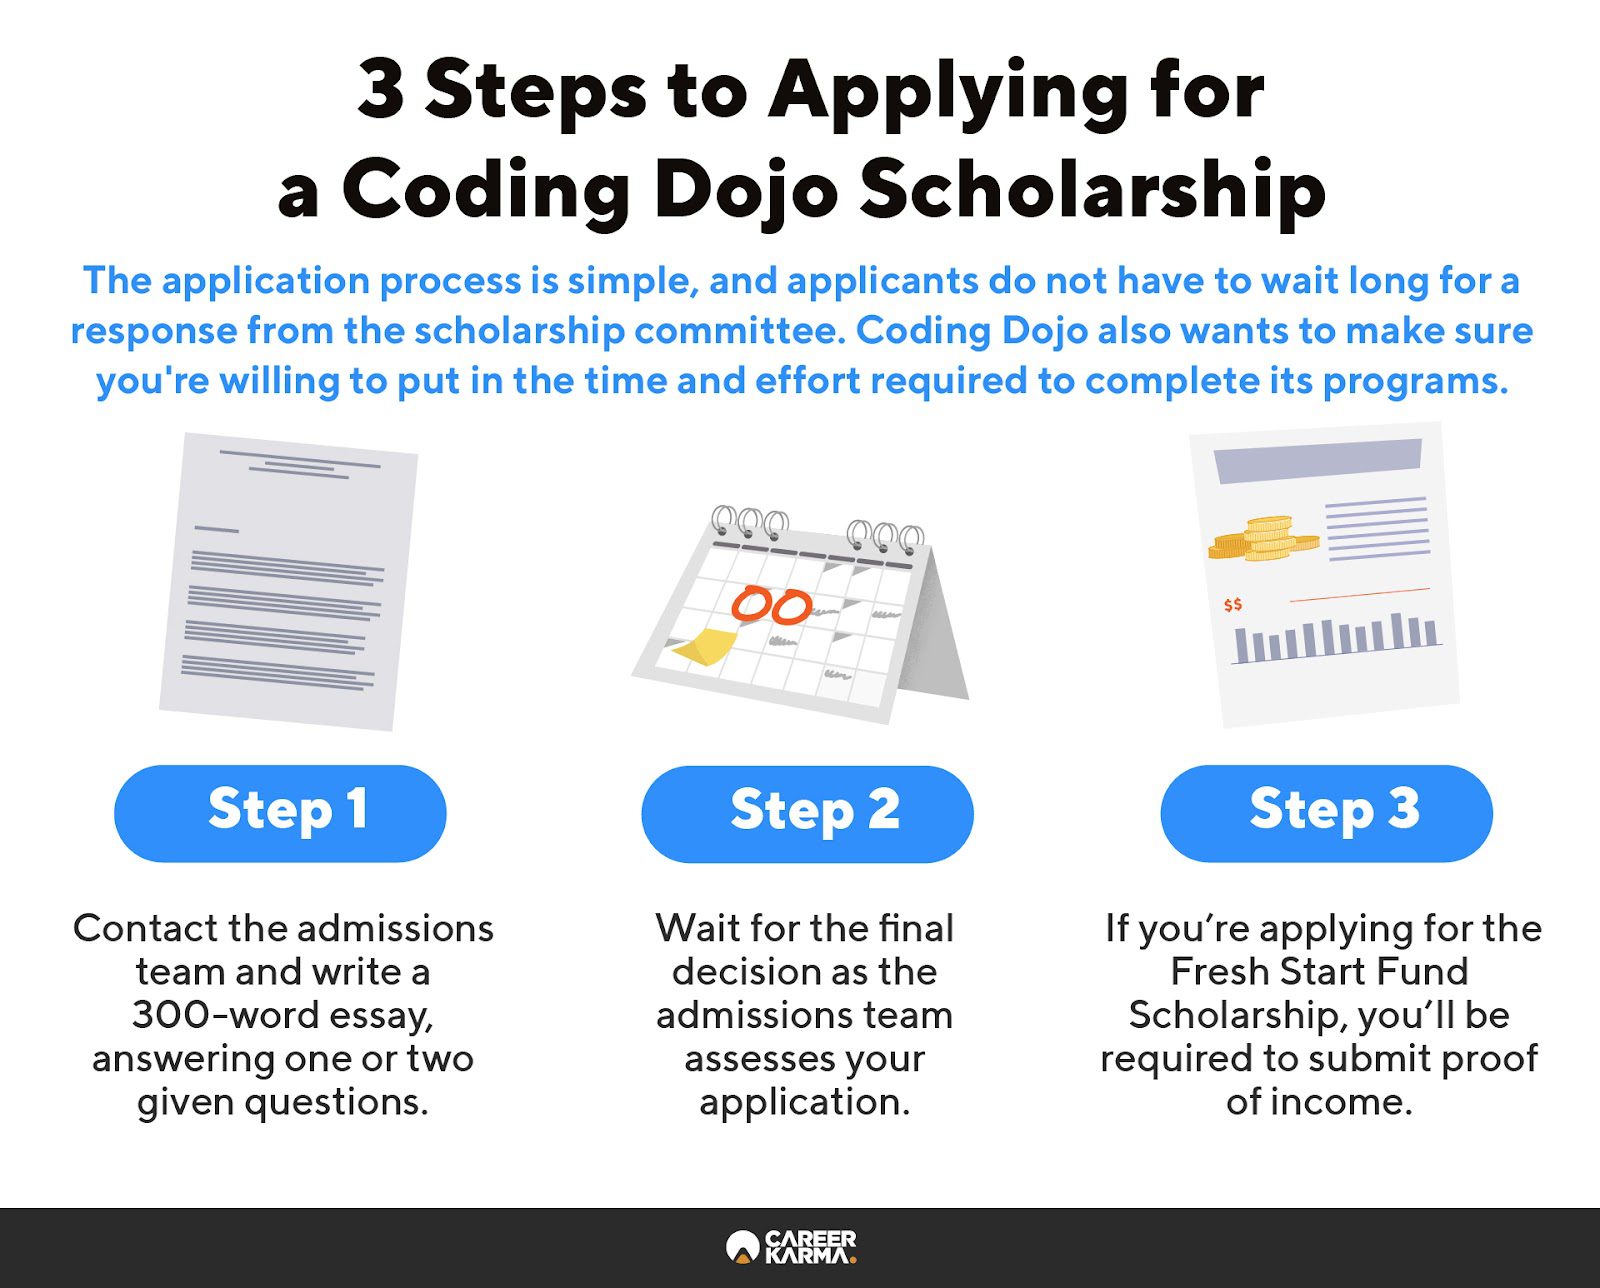 Alt-Text: An infographic showing the application process for a Coding Dojo scholarship